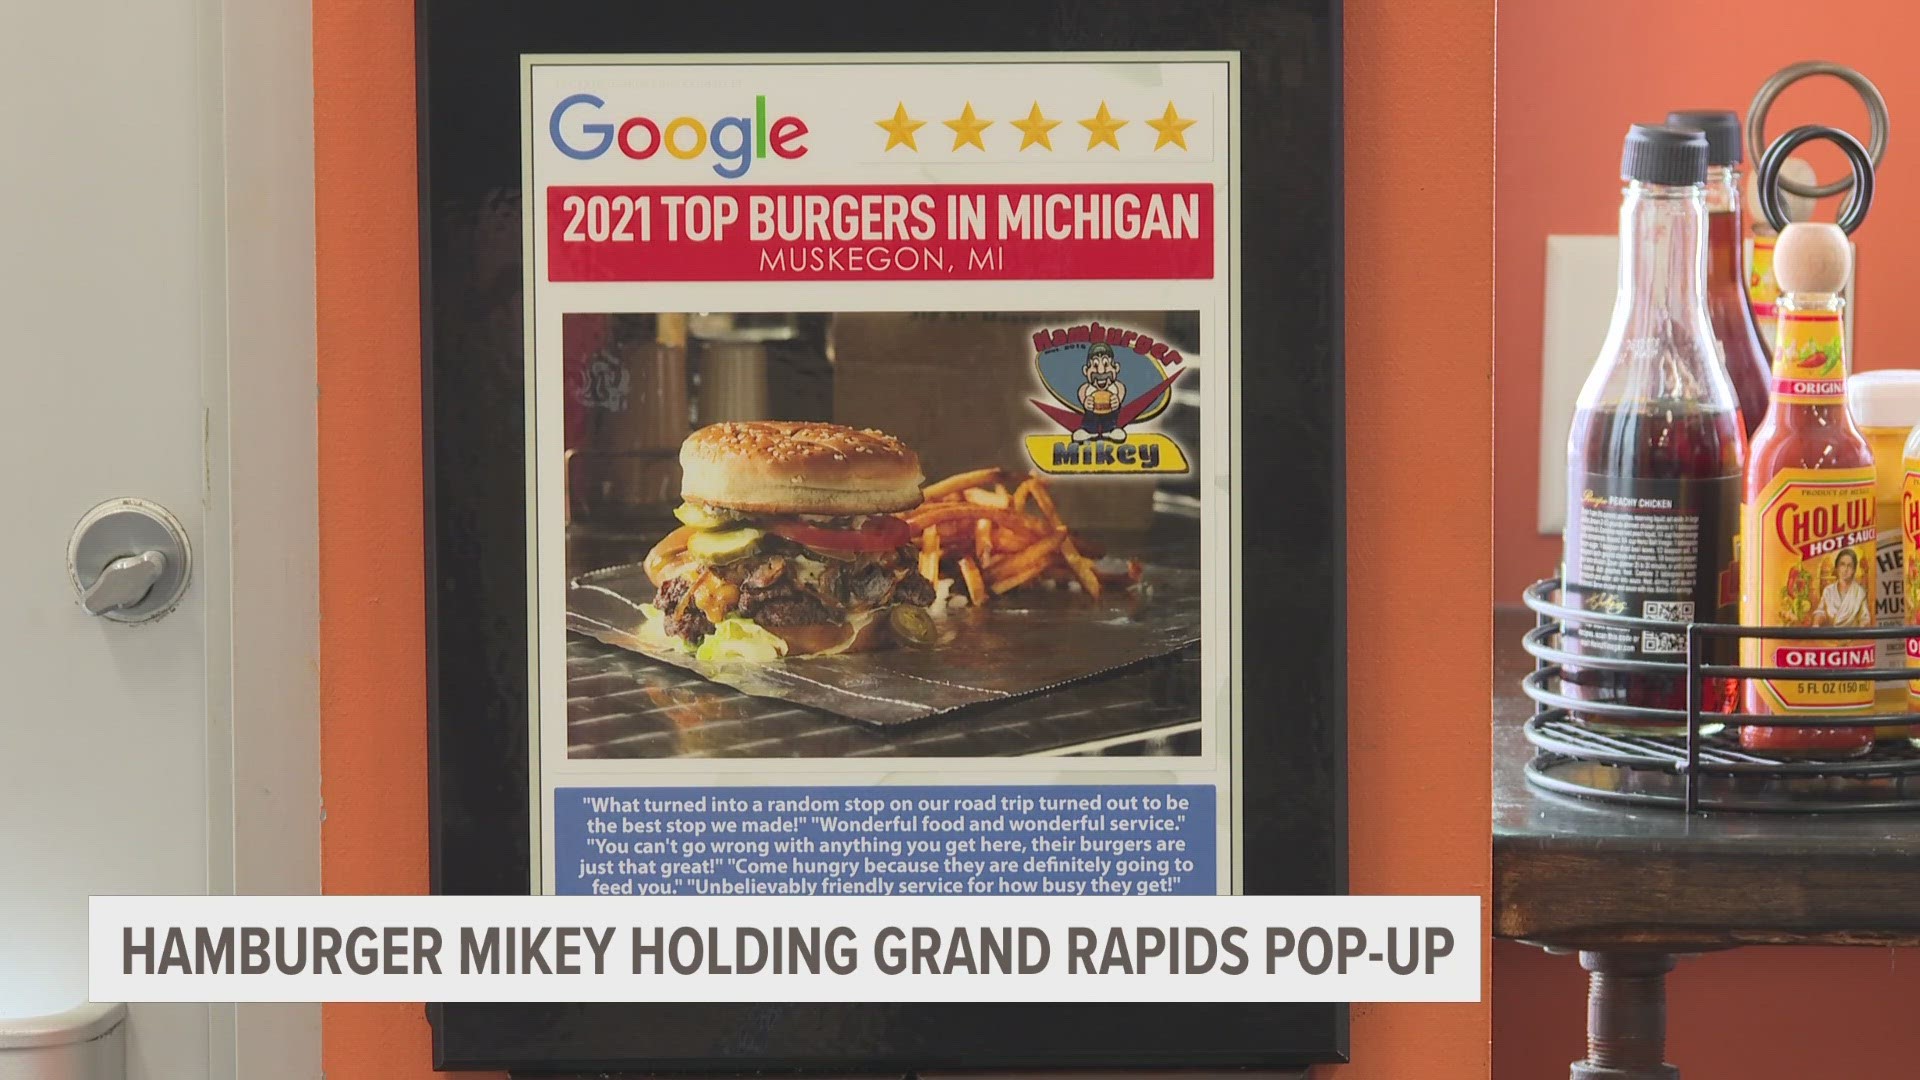 Hamburger Mikey is bringing its popular burgers to Grand Rapids with weekly pop-ups starting Dec. 4.